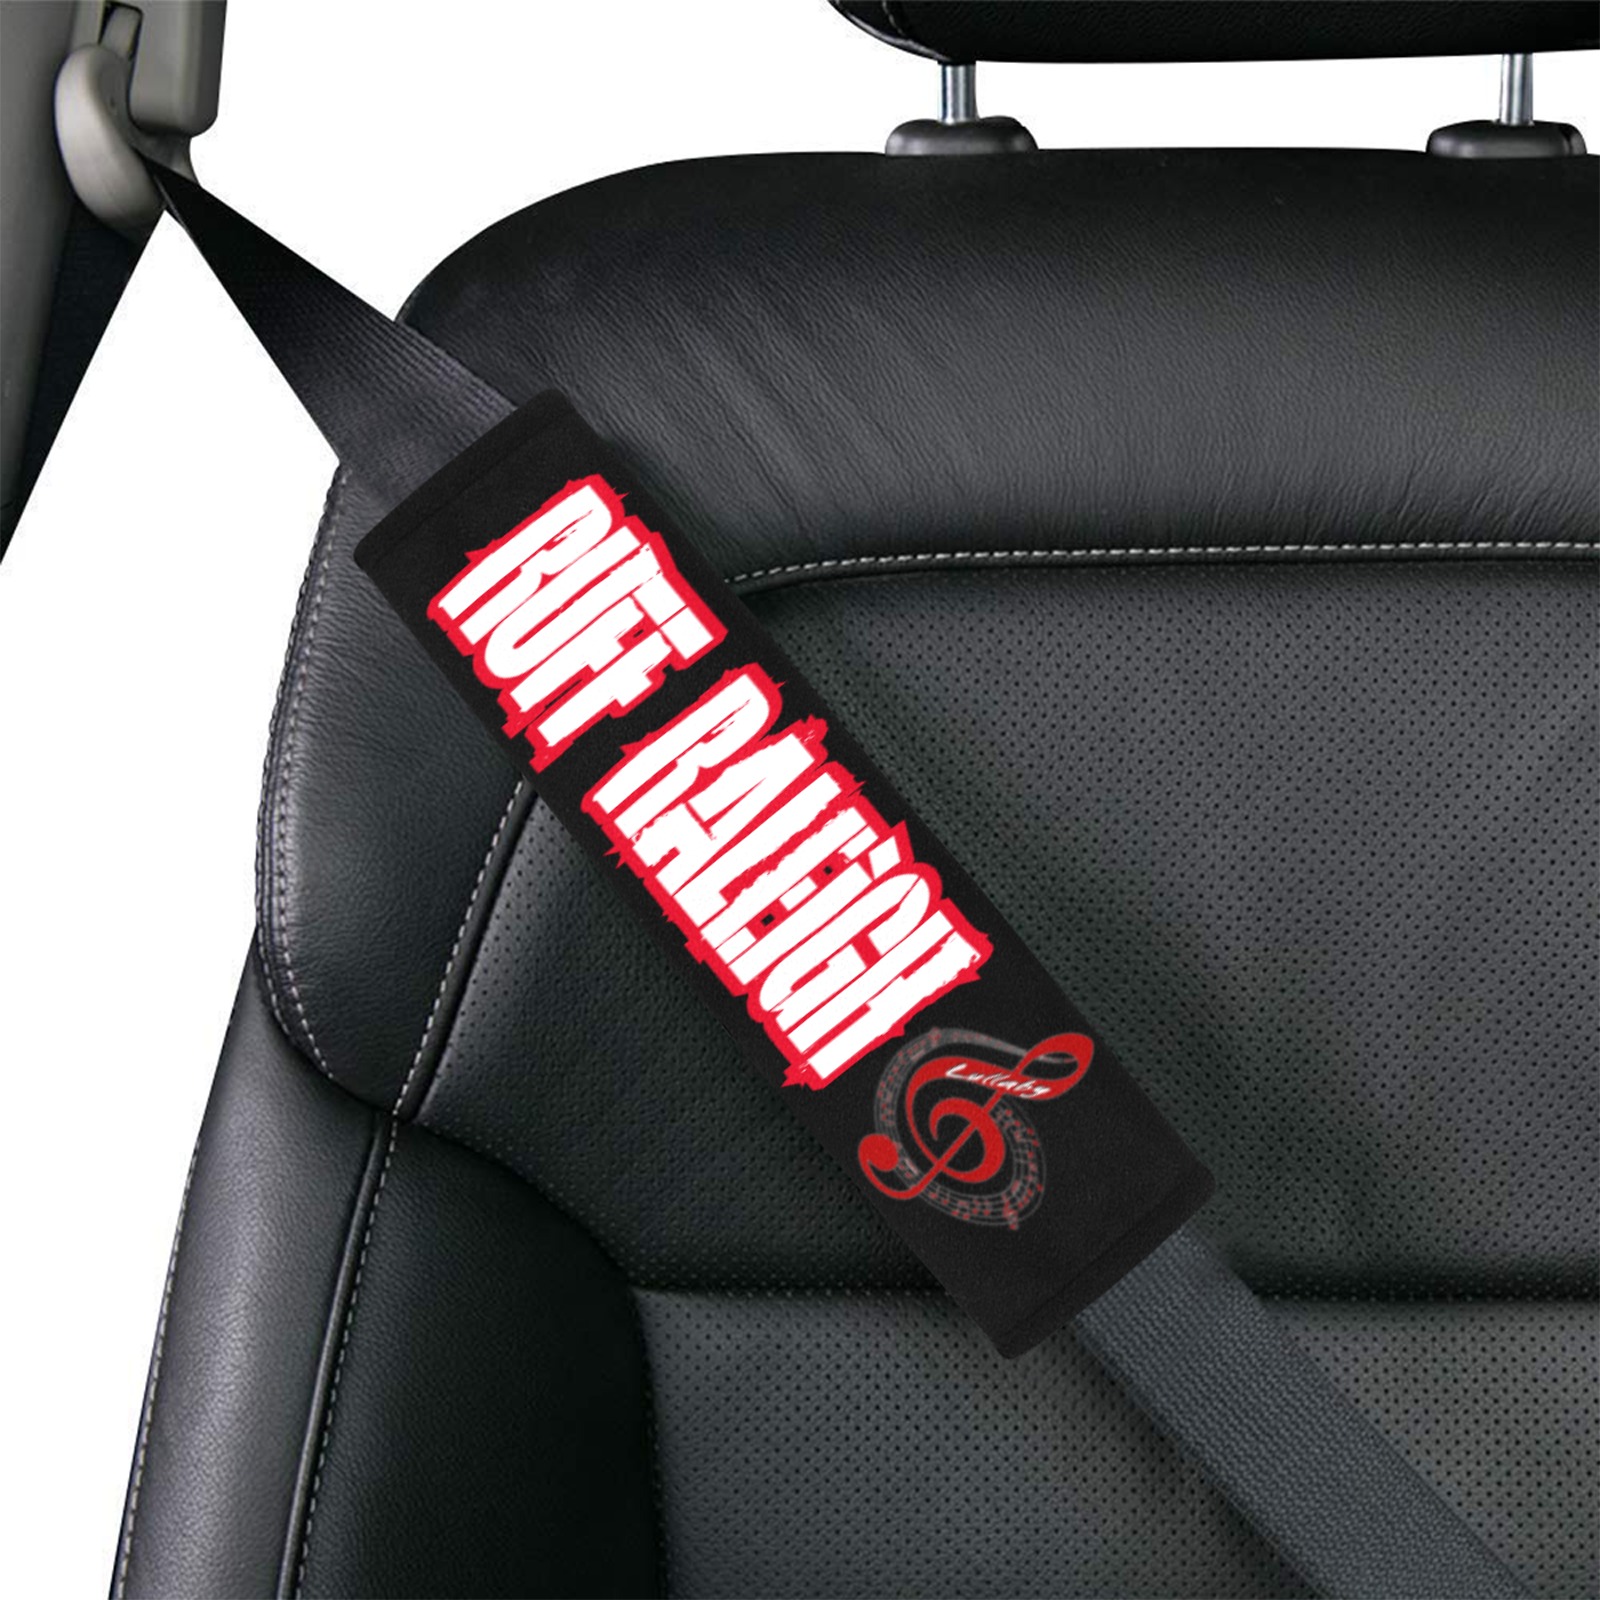 Raleigh Car Seat Belt Cover 7''x10'' (Pack of 2)